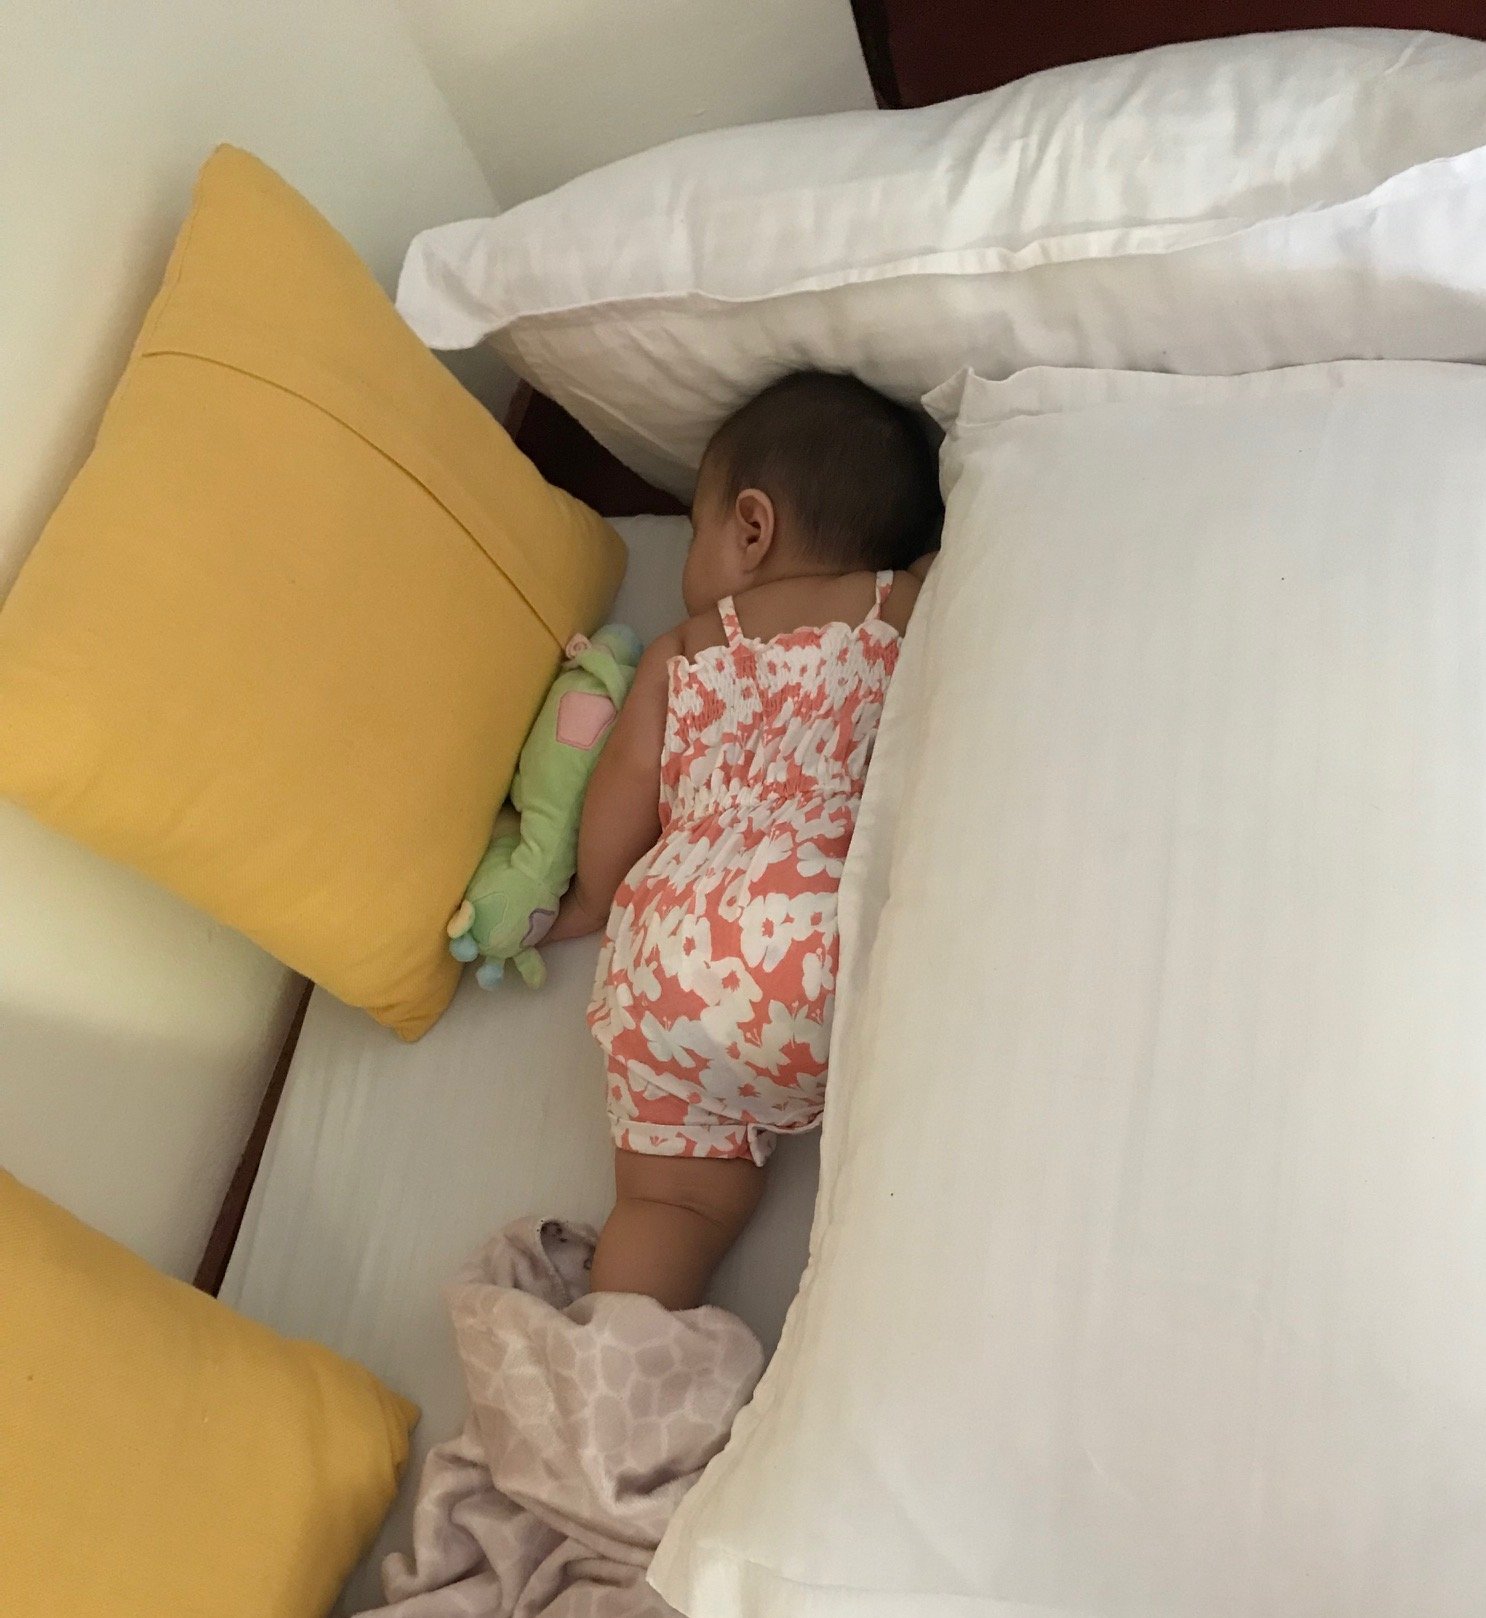 With no crib available at a home stay in Kerala, a floor mattress and pillows kept my daughter comfortable